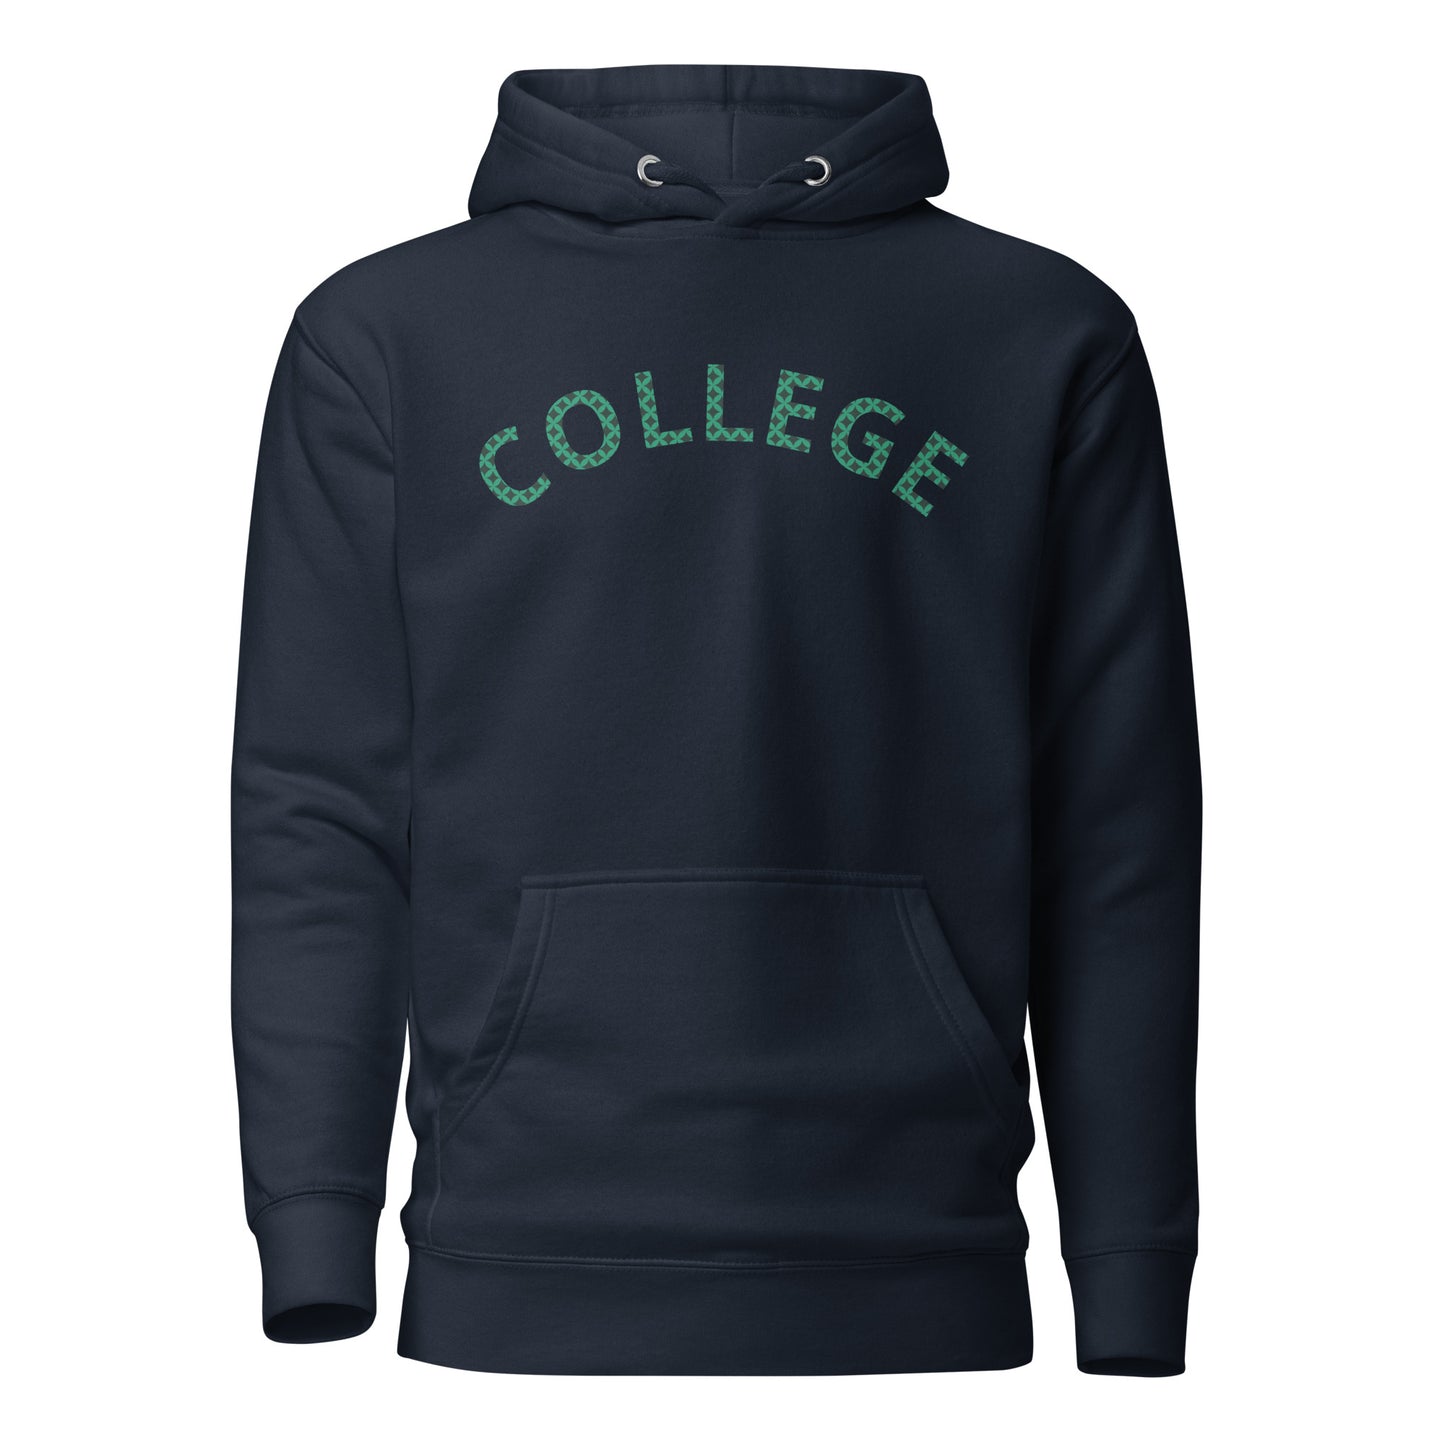 Navy Mens Hoodie that says 'College' in the center